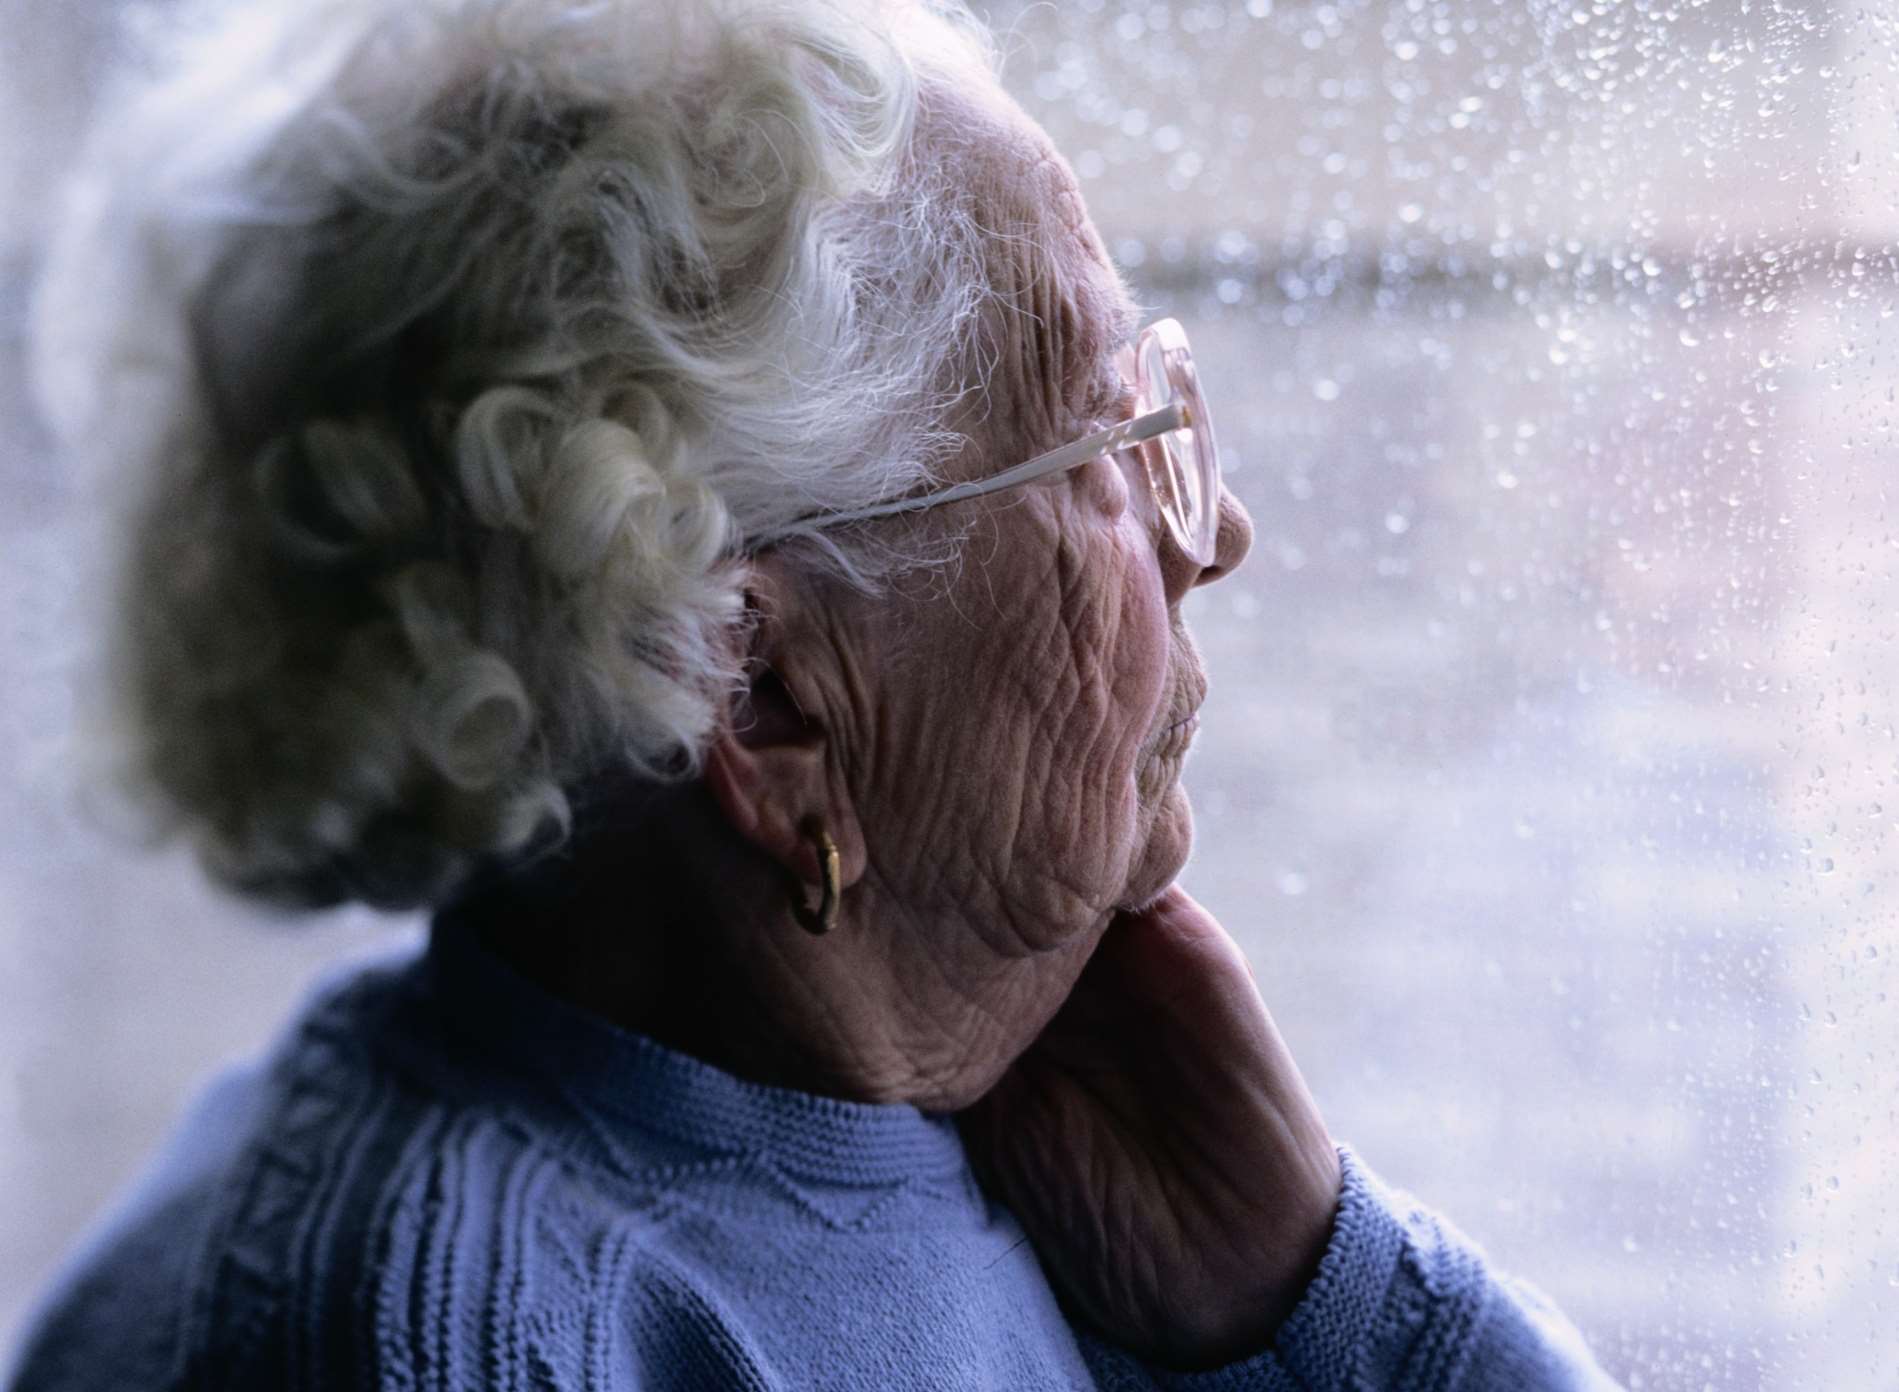 Some elderly people have no one to spend the festive season with